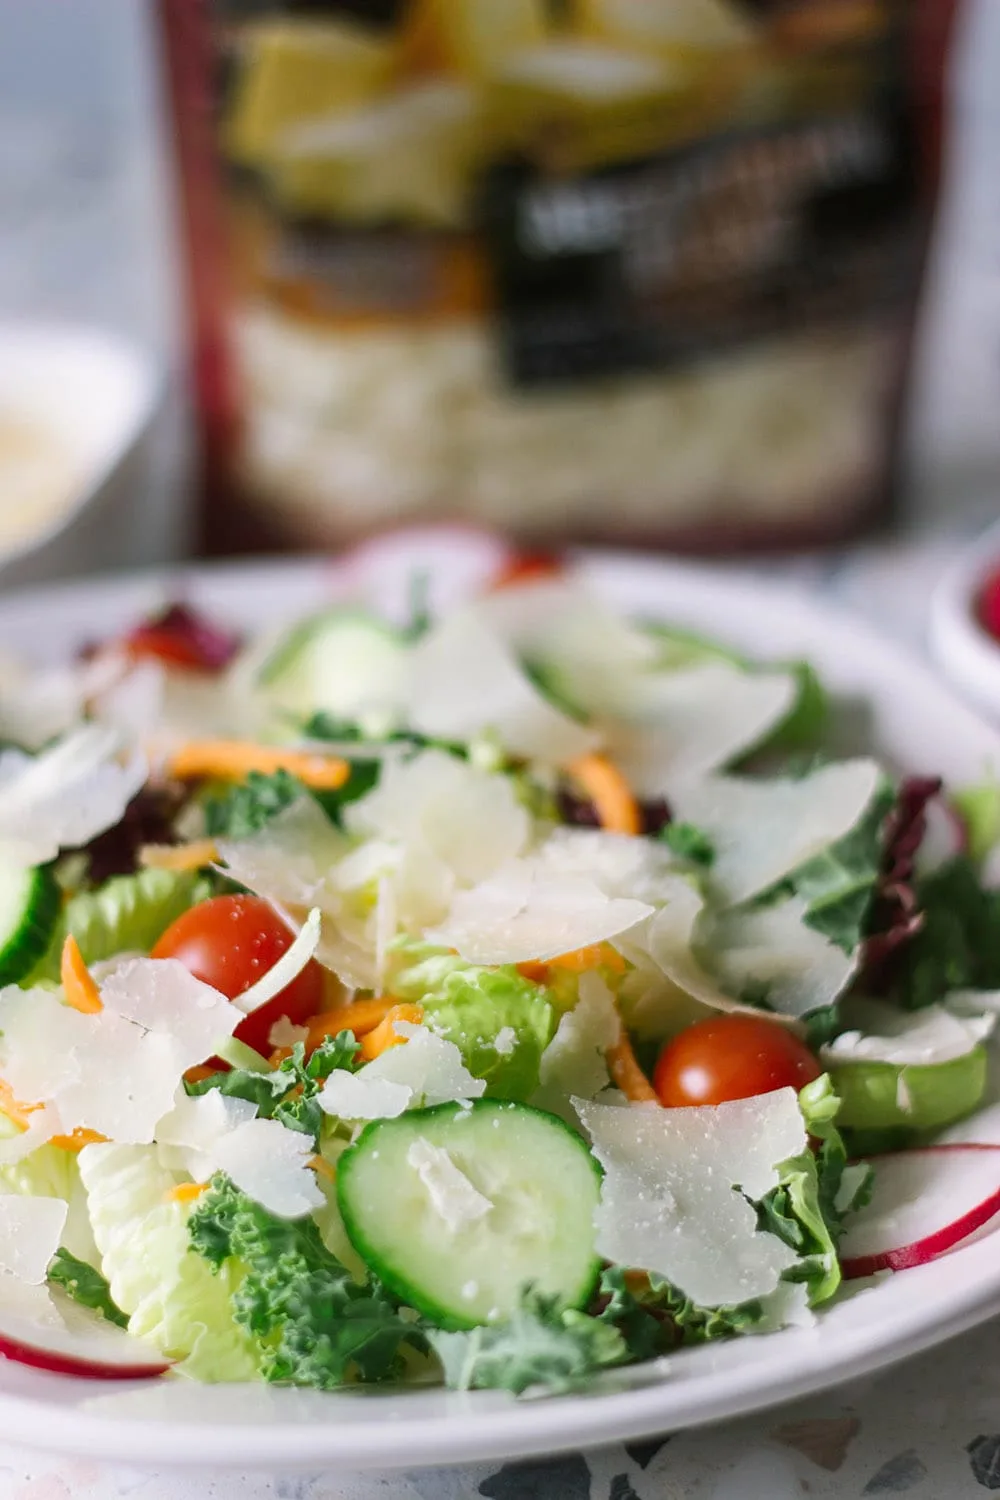 Salad with shaved parmesan.